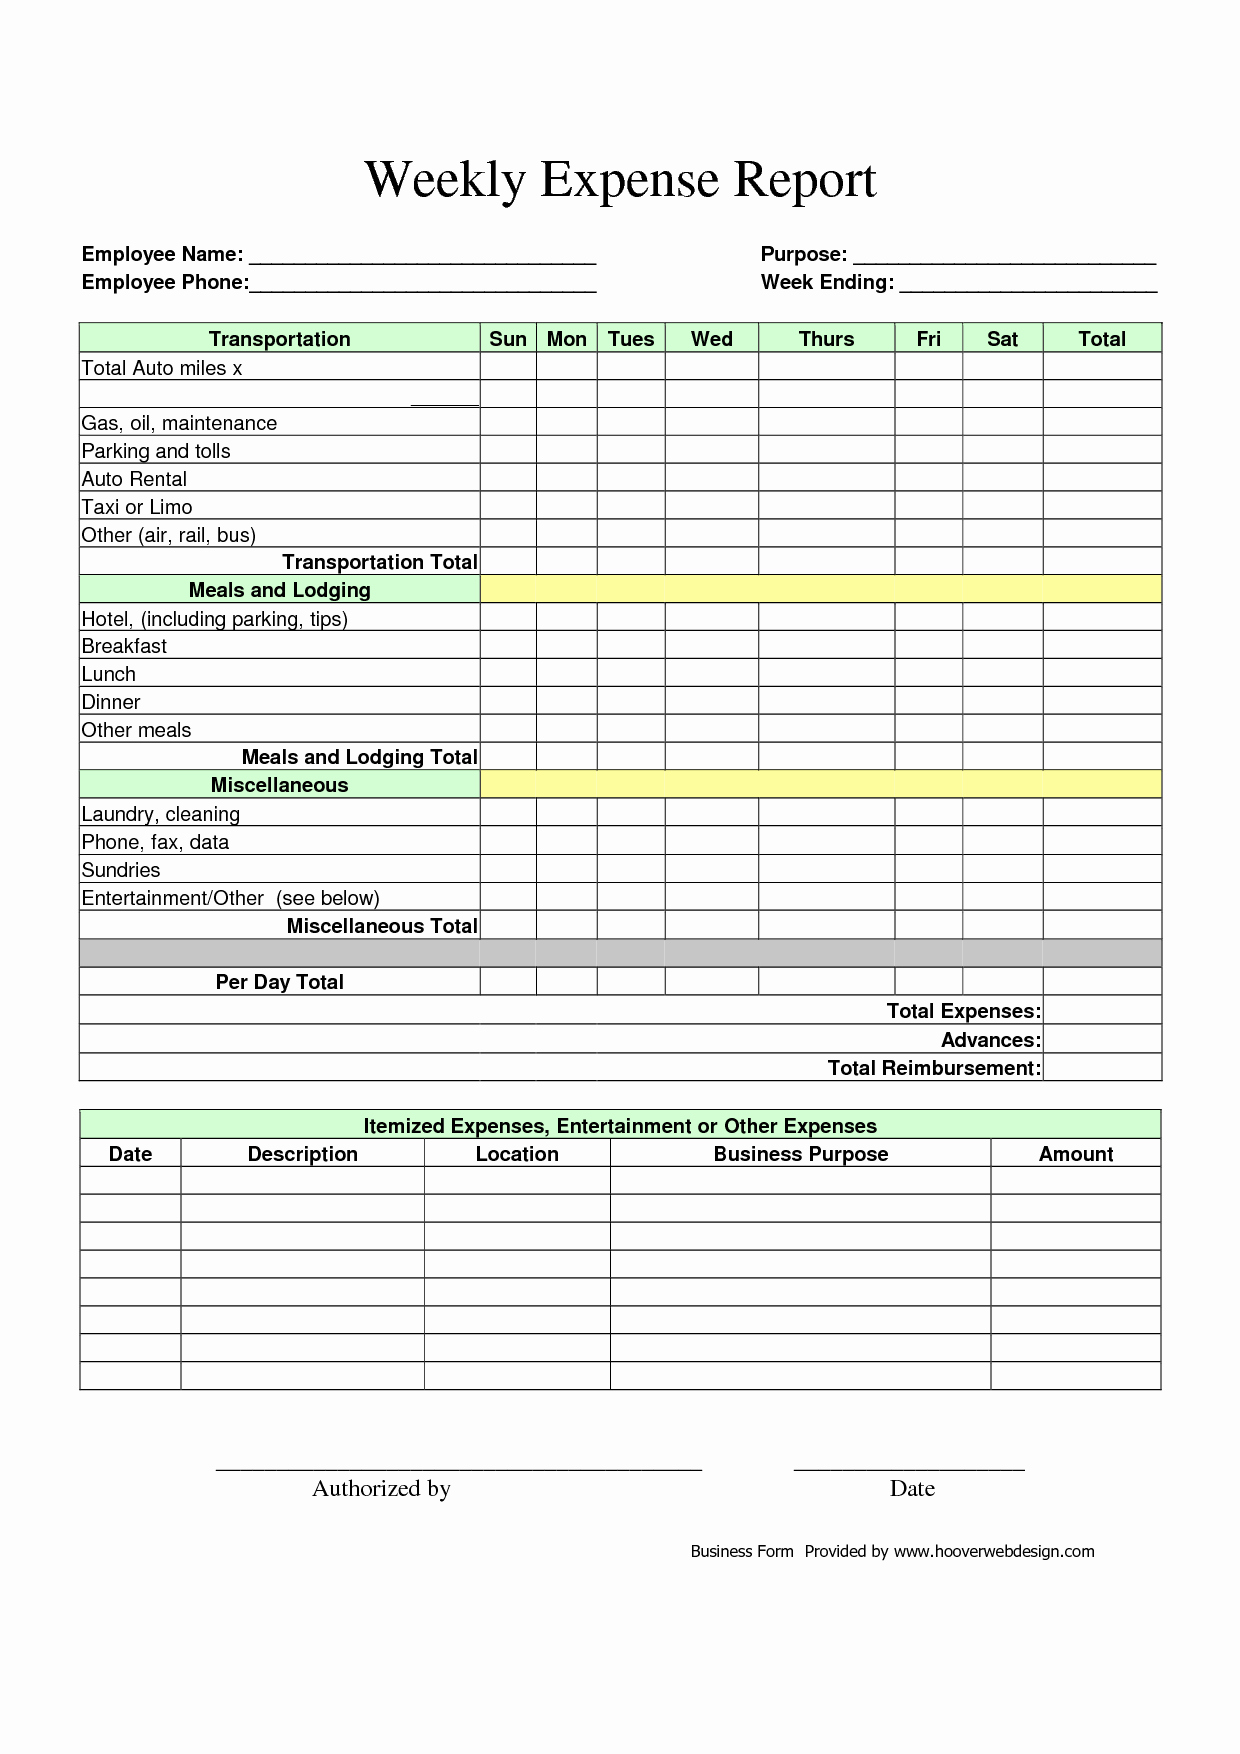 Excel Expense Report Template Awesome Blank Expense Report Portablegasgrillweber